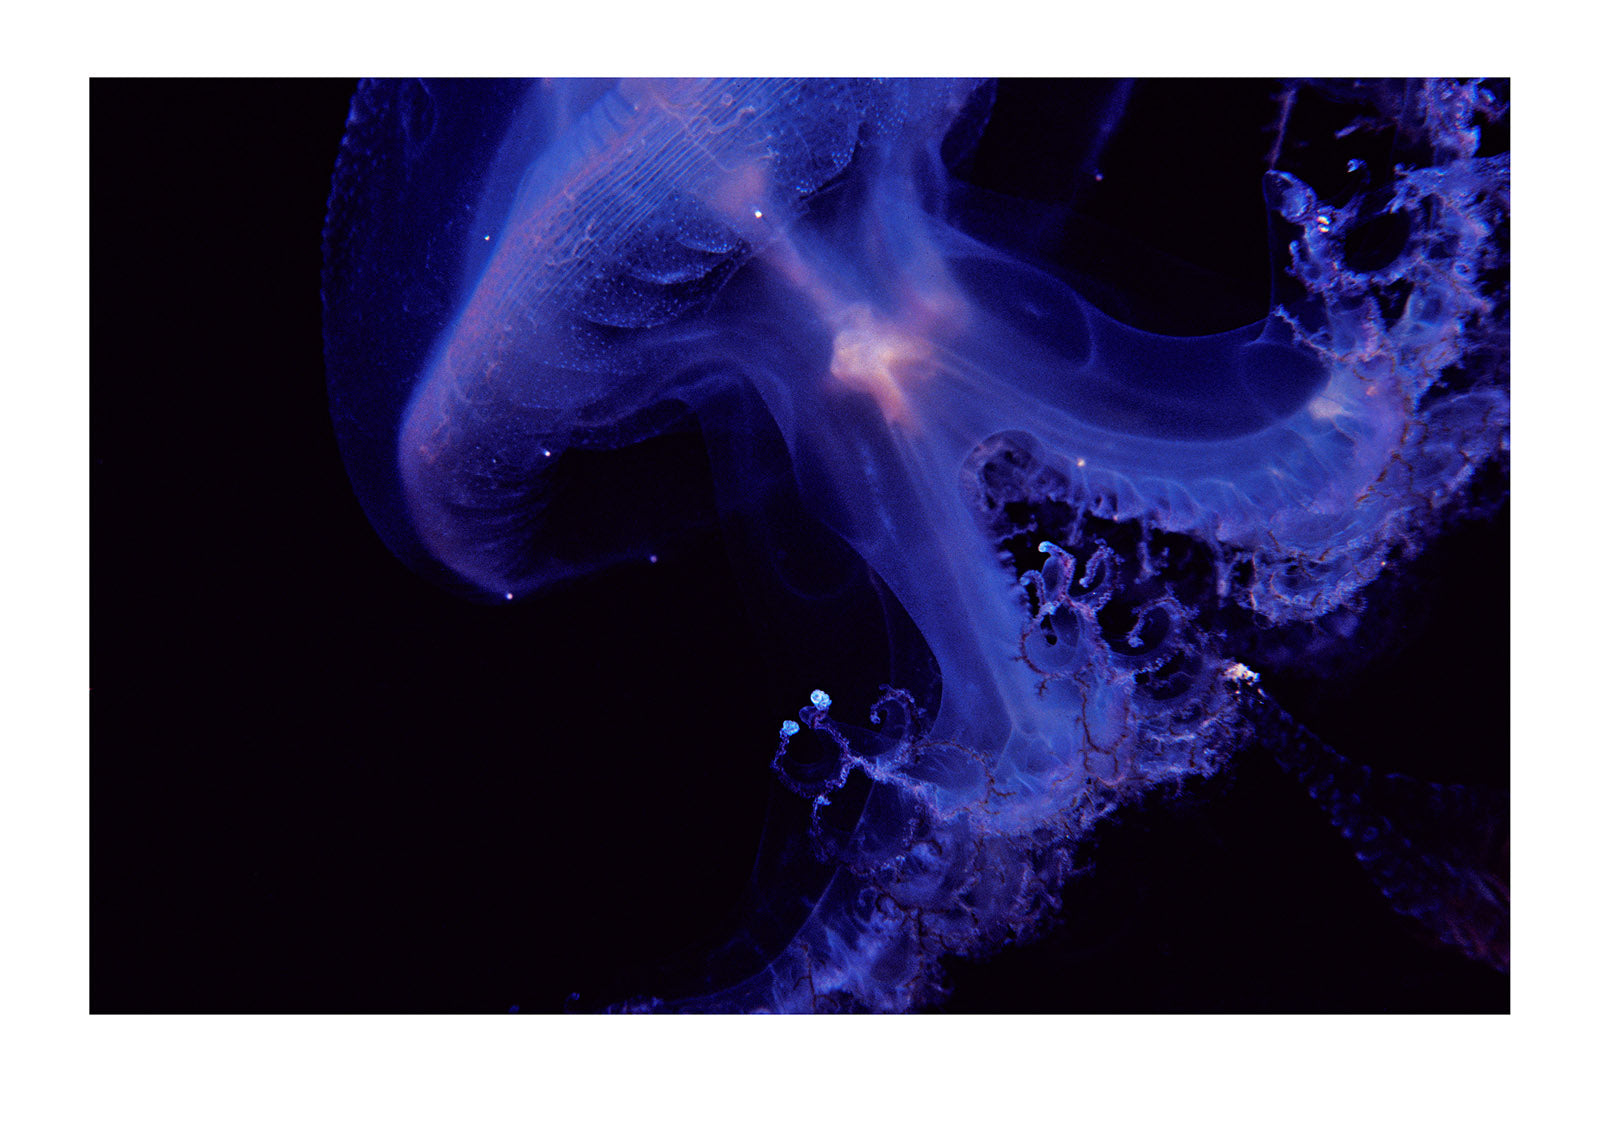 An iridescent blue Southern Tailed Jelly emerges from the darkness. Melbourne Aquarium, Victoria, Australia.